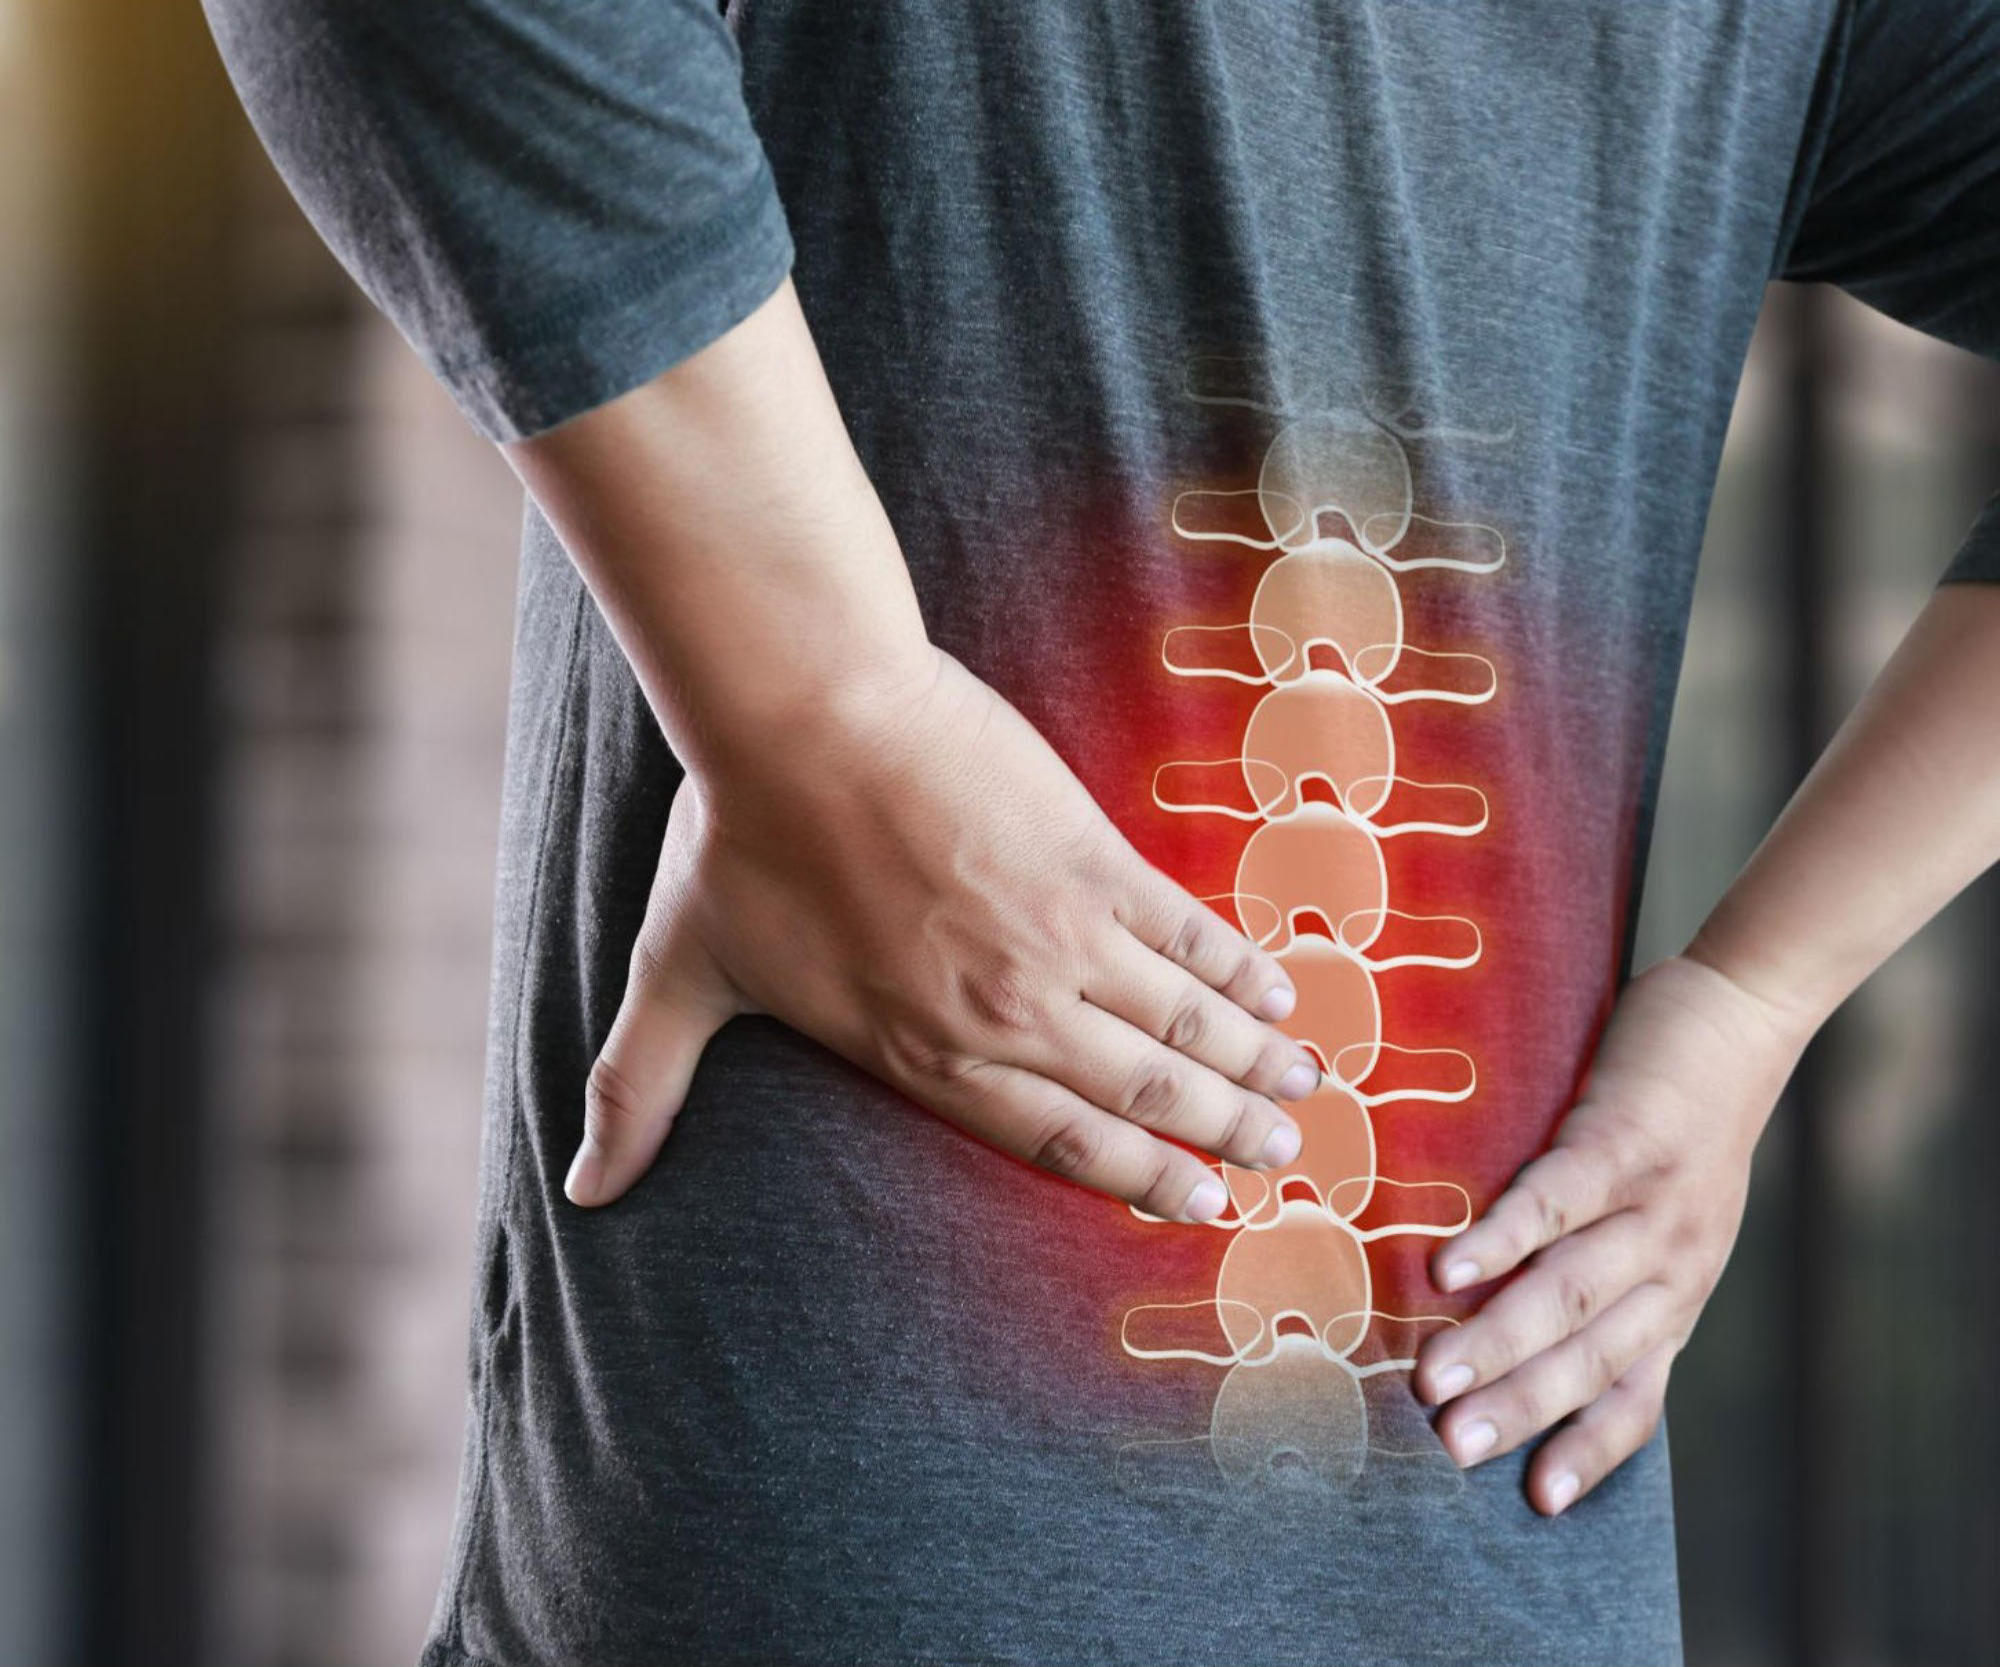 https://scitechdaily.com/images/Back-Pain-Spinal-Cord.jpg